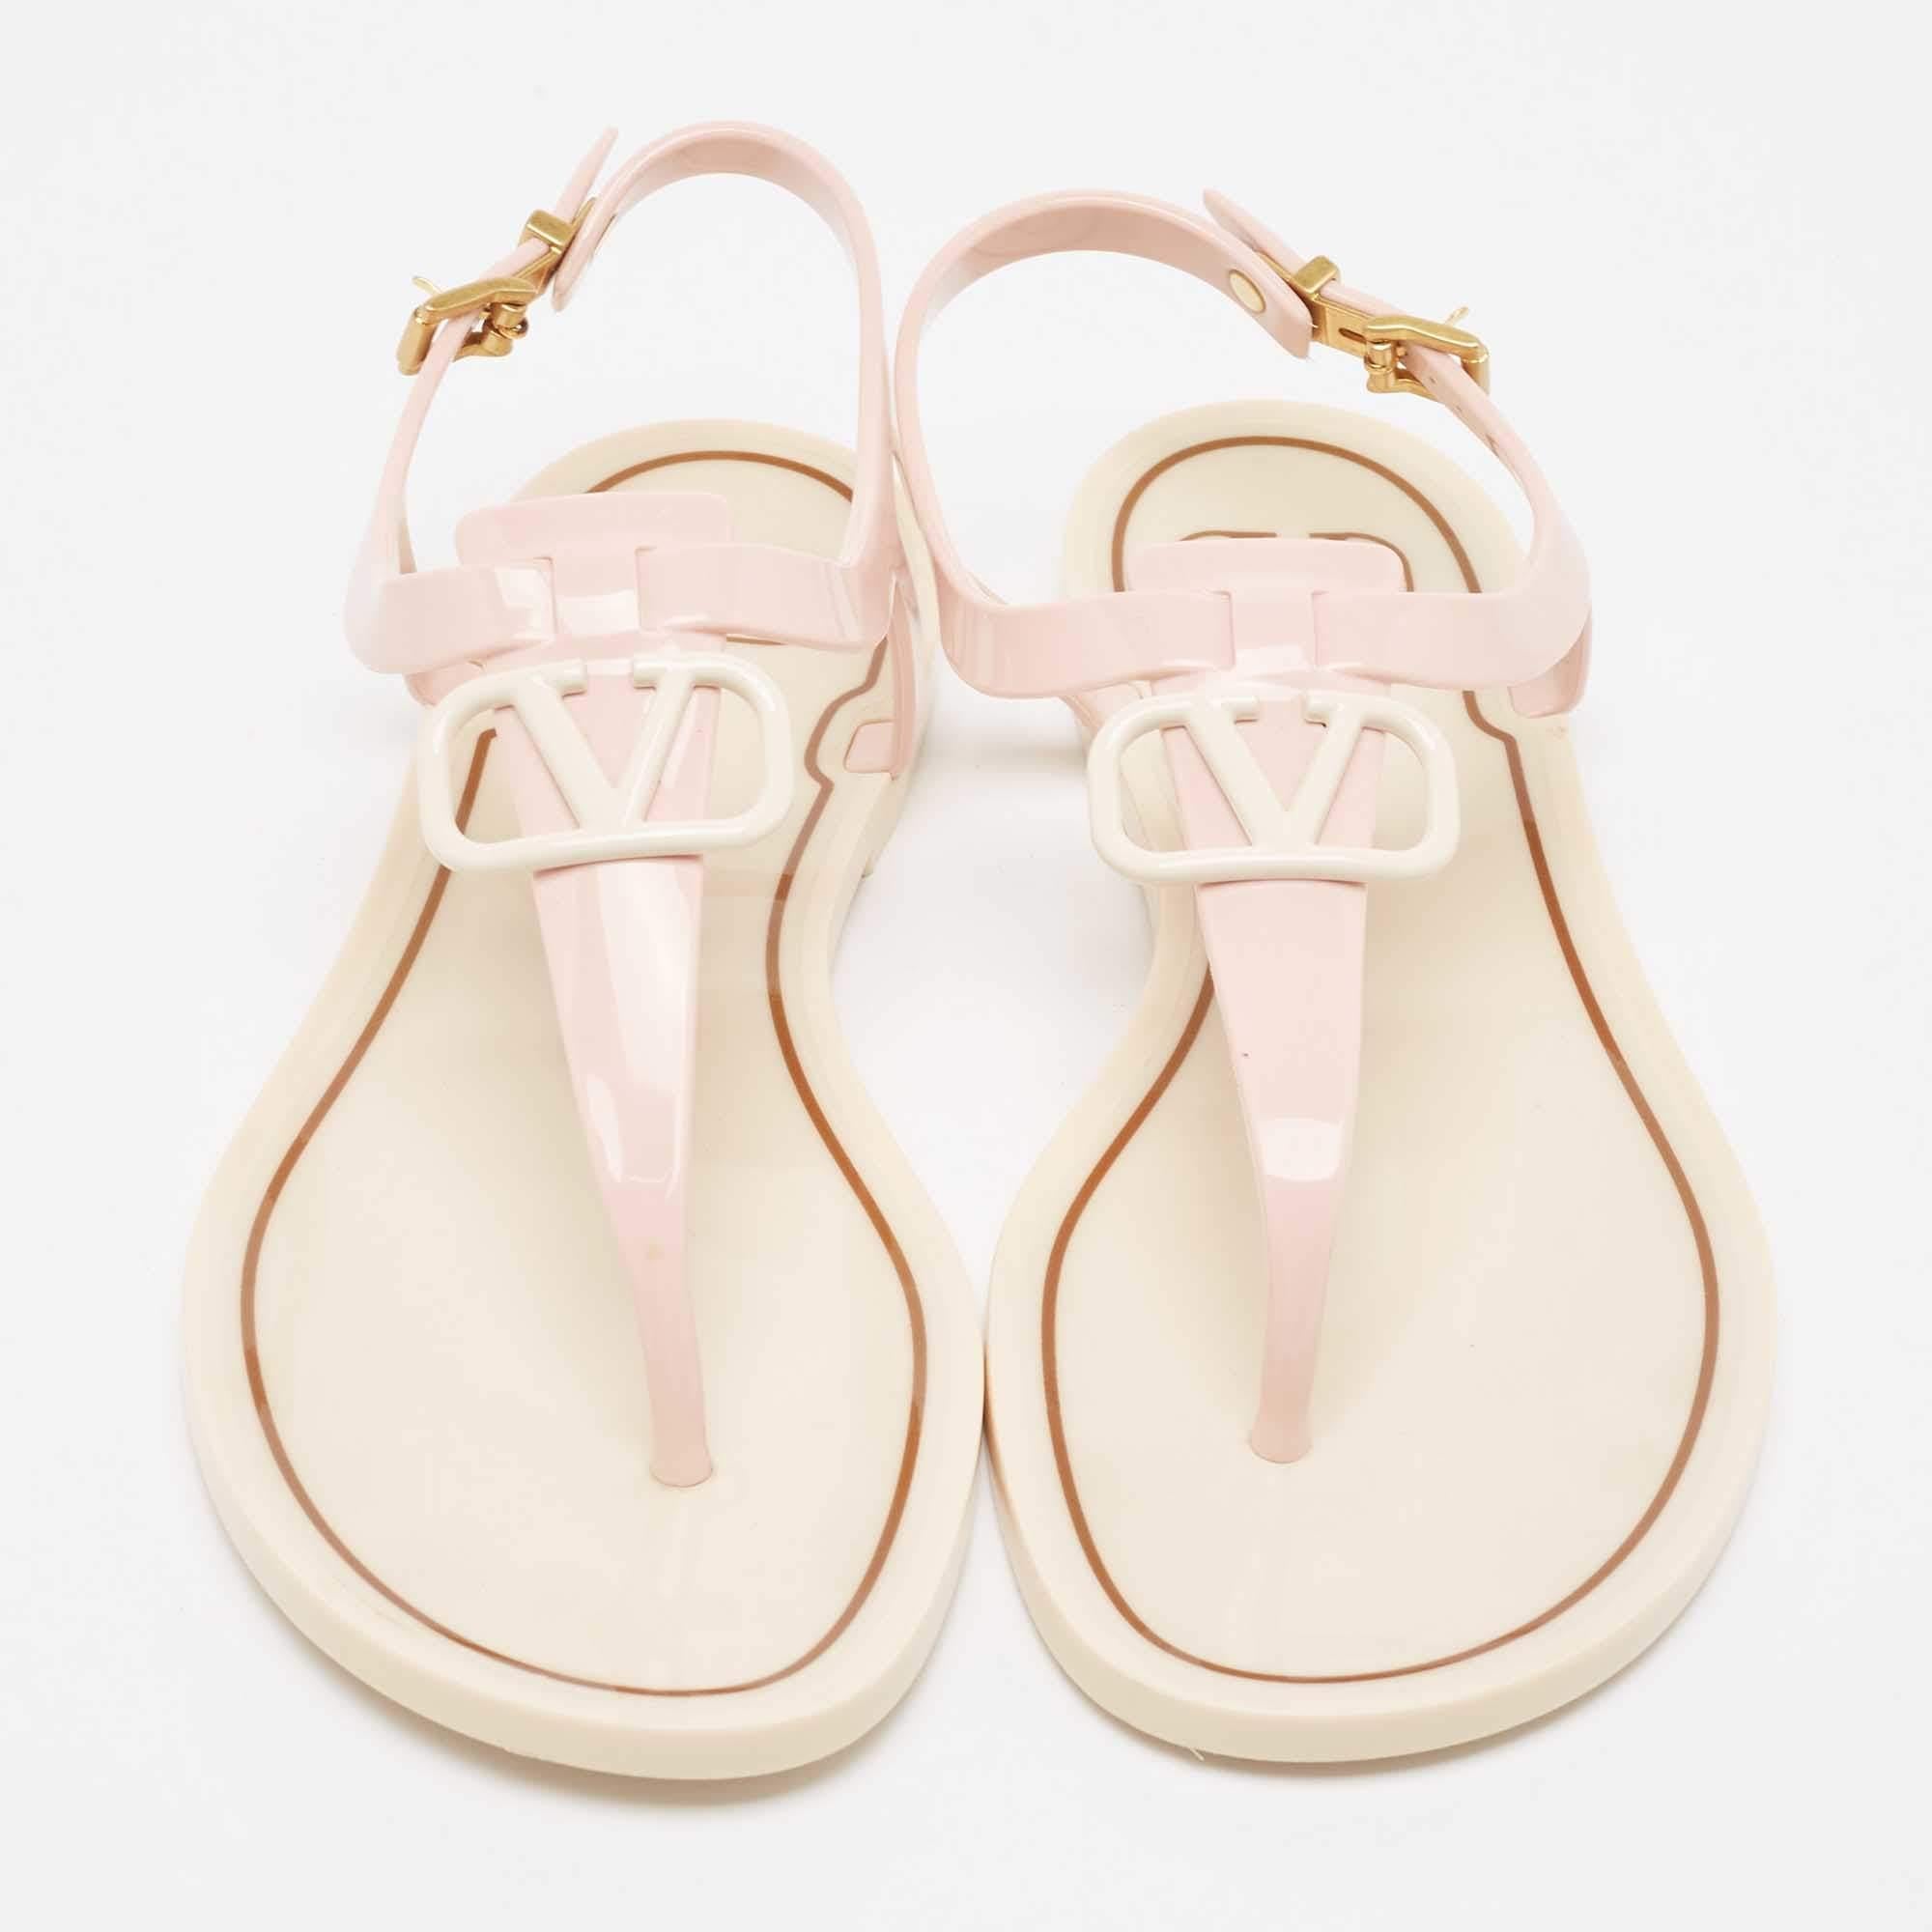 Wear these designer sandals to spruce up any outfit. They are versatile, chic, and can be easily styled. Made using quality materials, these sandals are well-built and long-lasting.

Includes
Original Dustbag, Original Box, Info Booklet